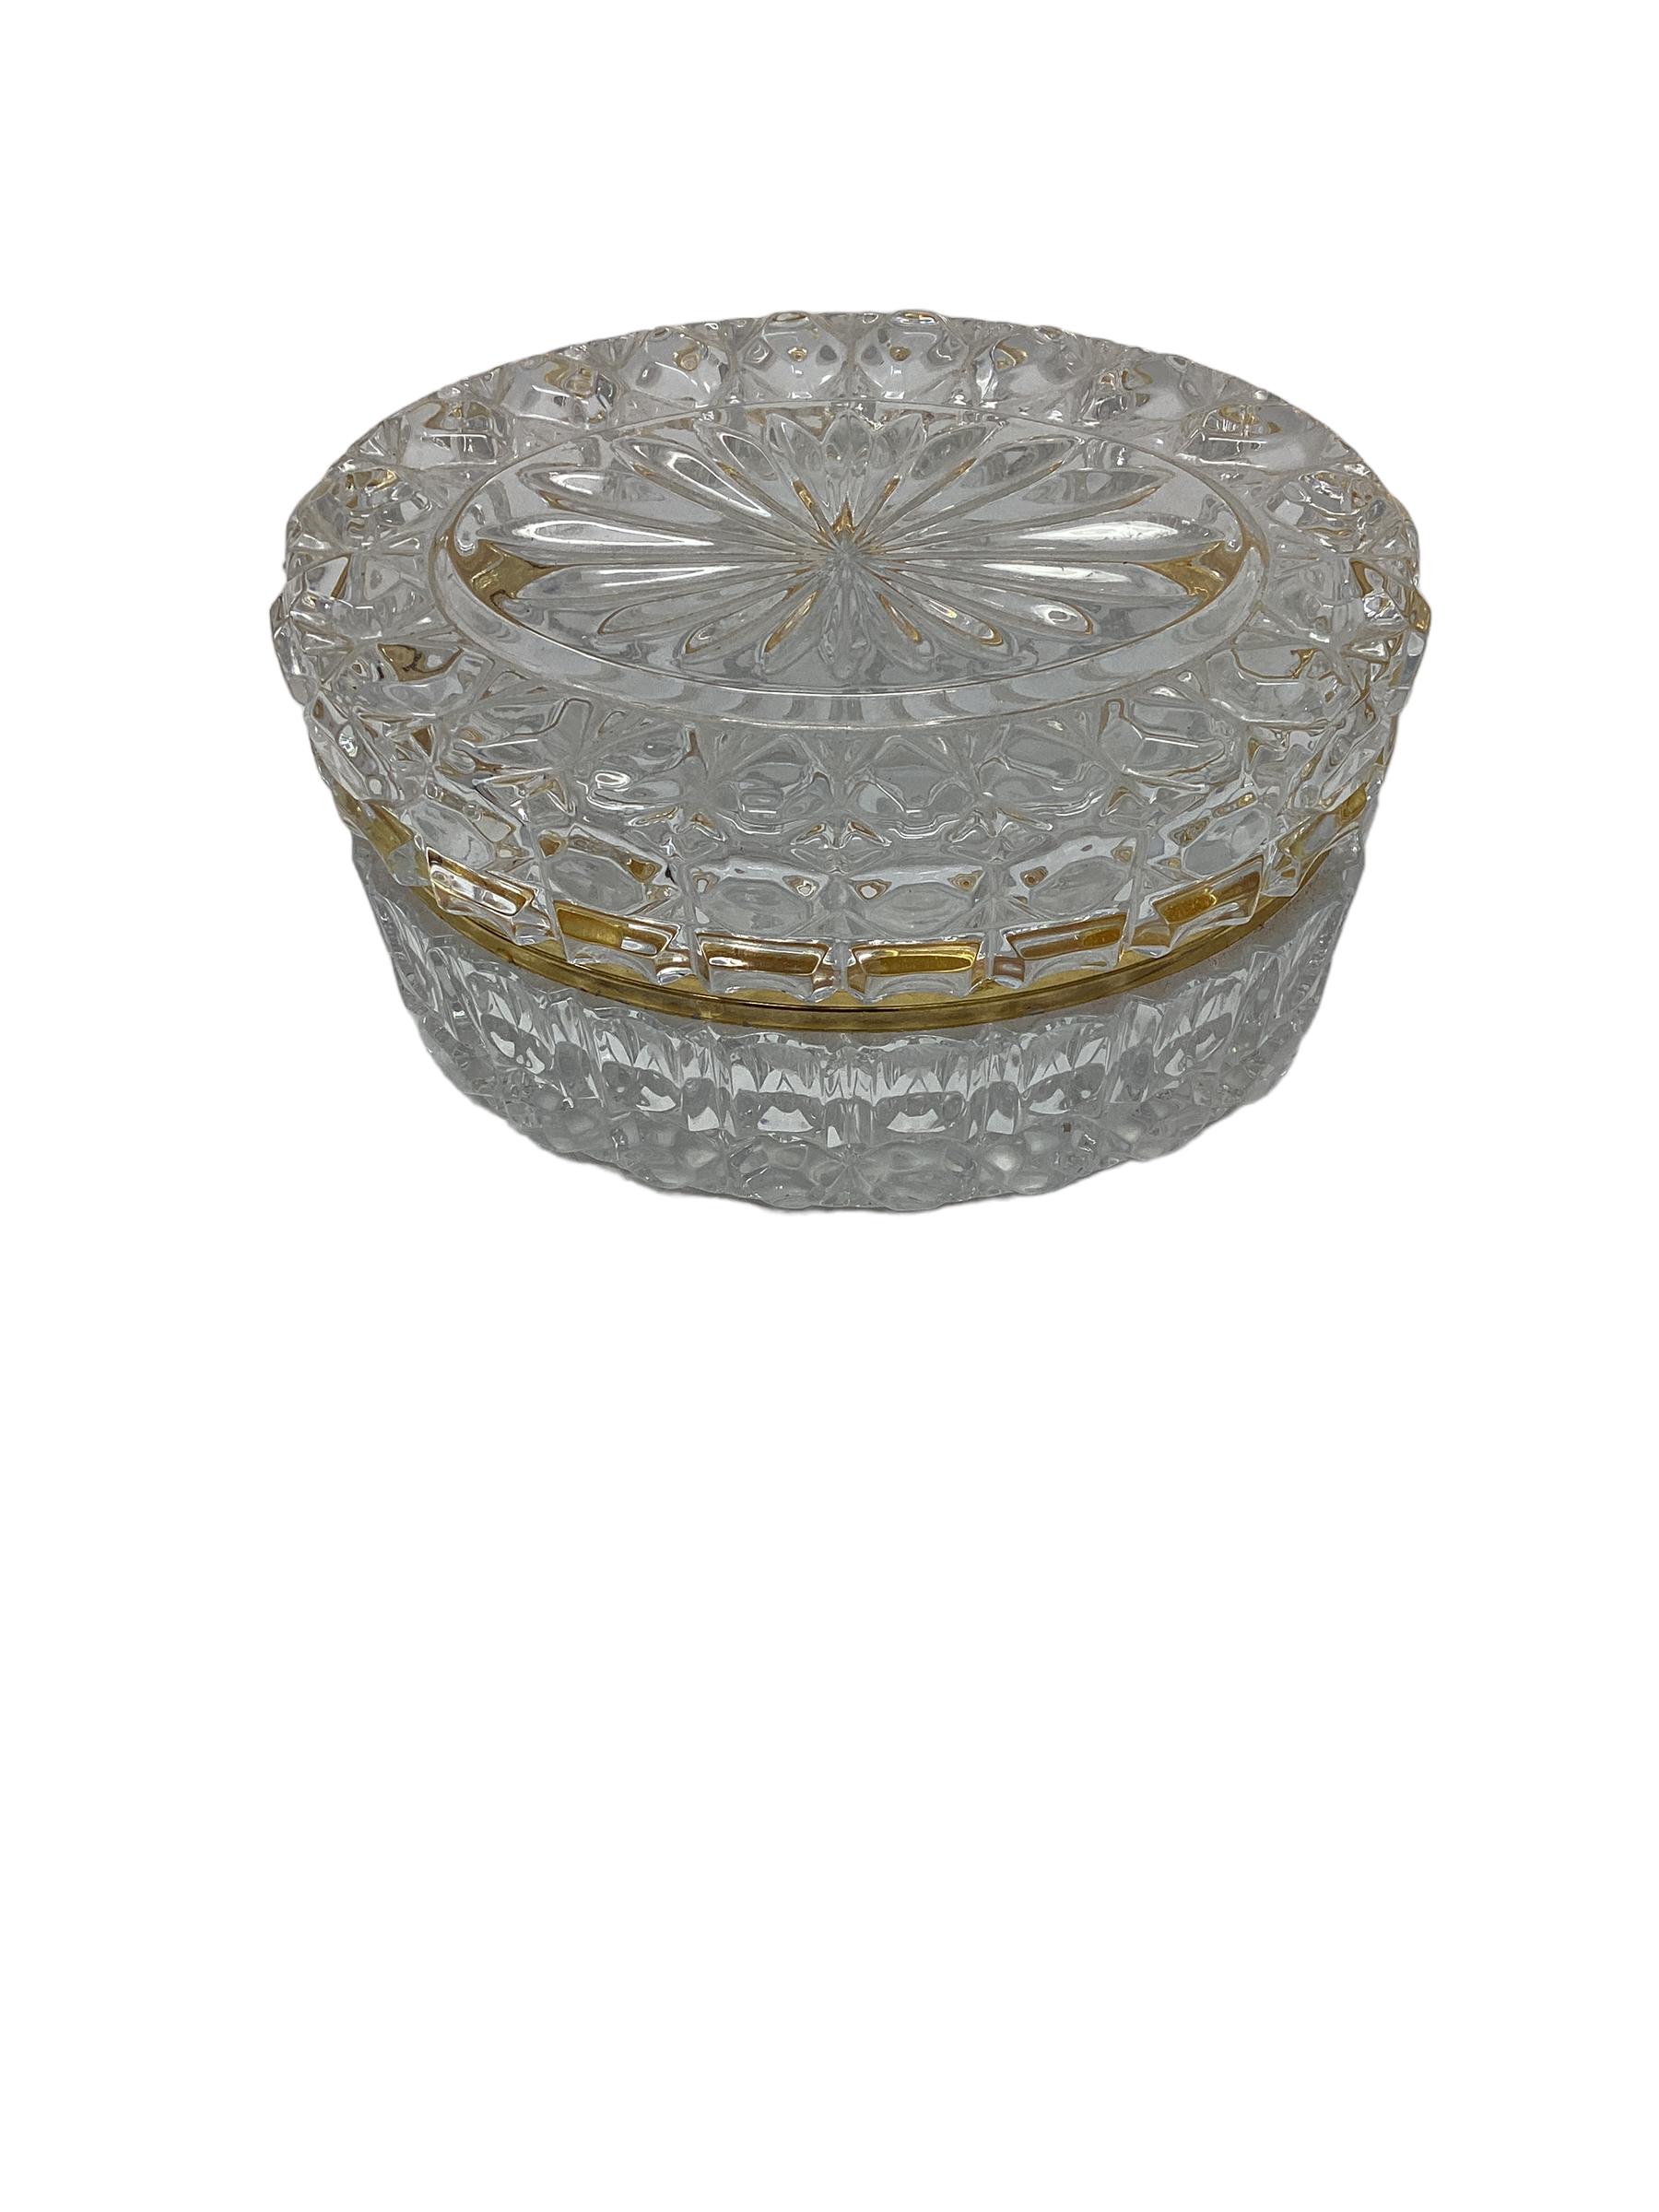 Late 20th Century Vintage Oval Glass Jewelry Box For Sale